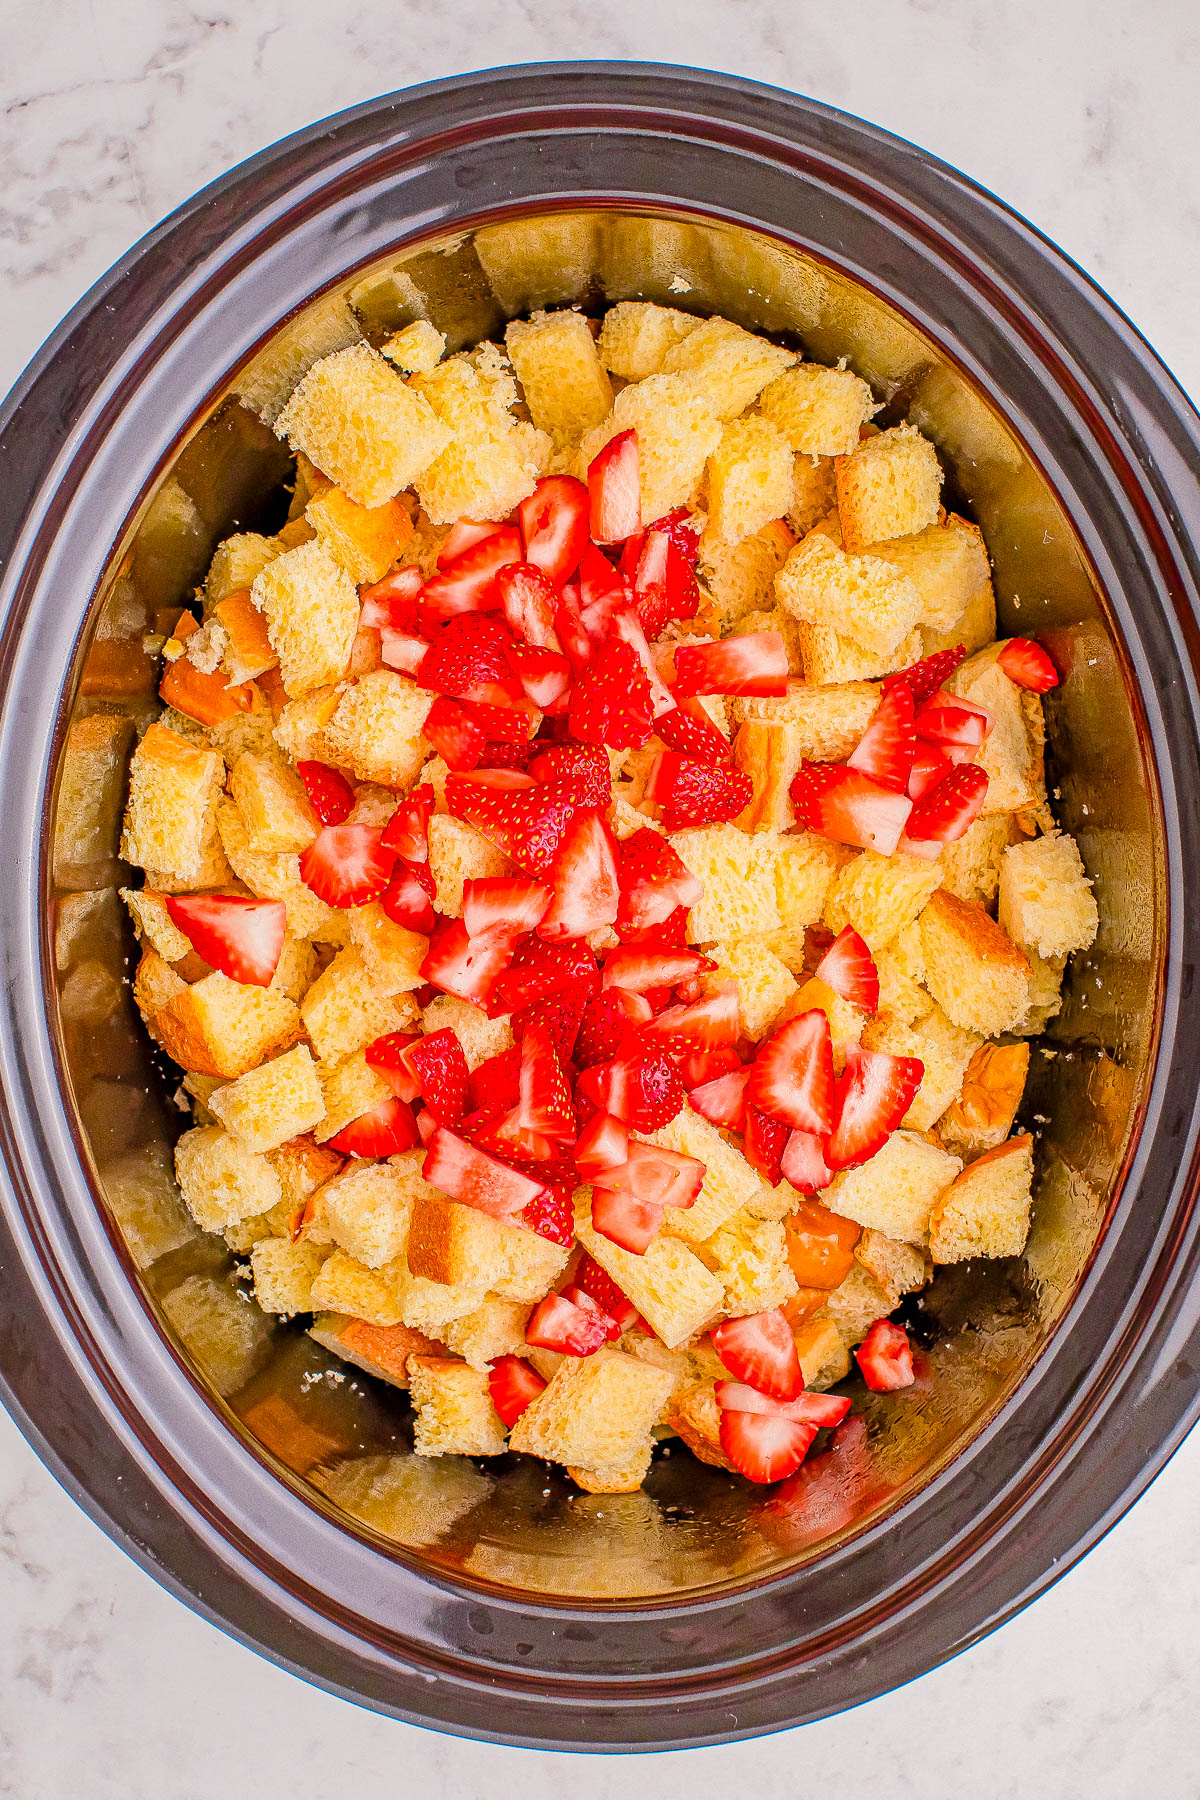 A slow cooker filled with cubed sponge cake and chopped strawberries on a marble surface.